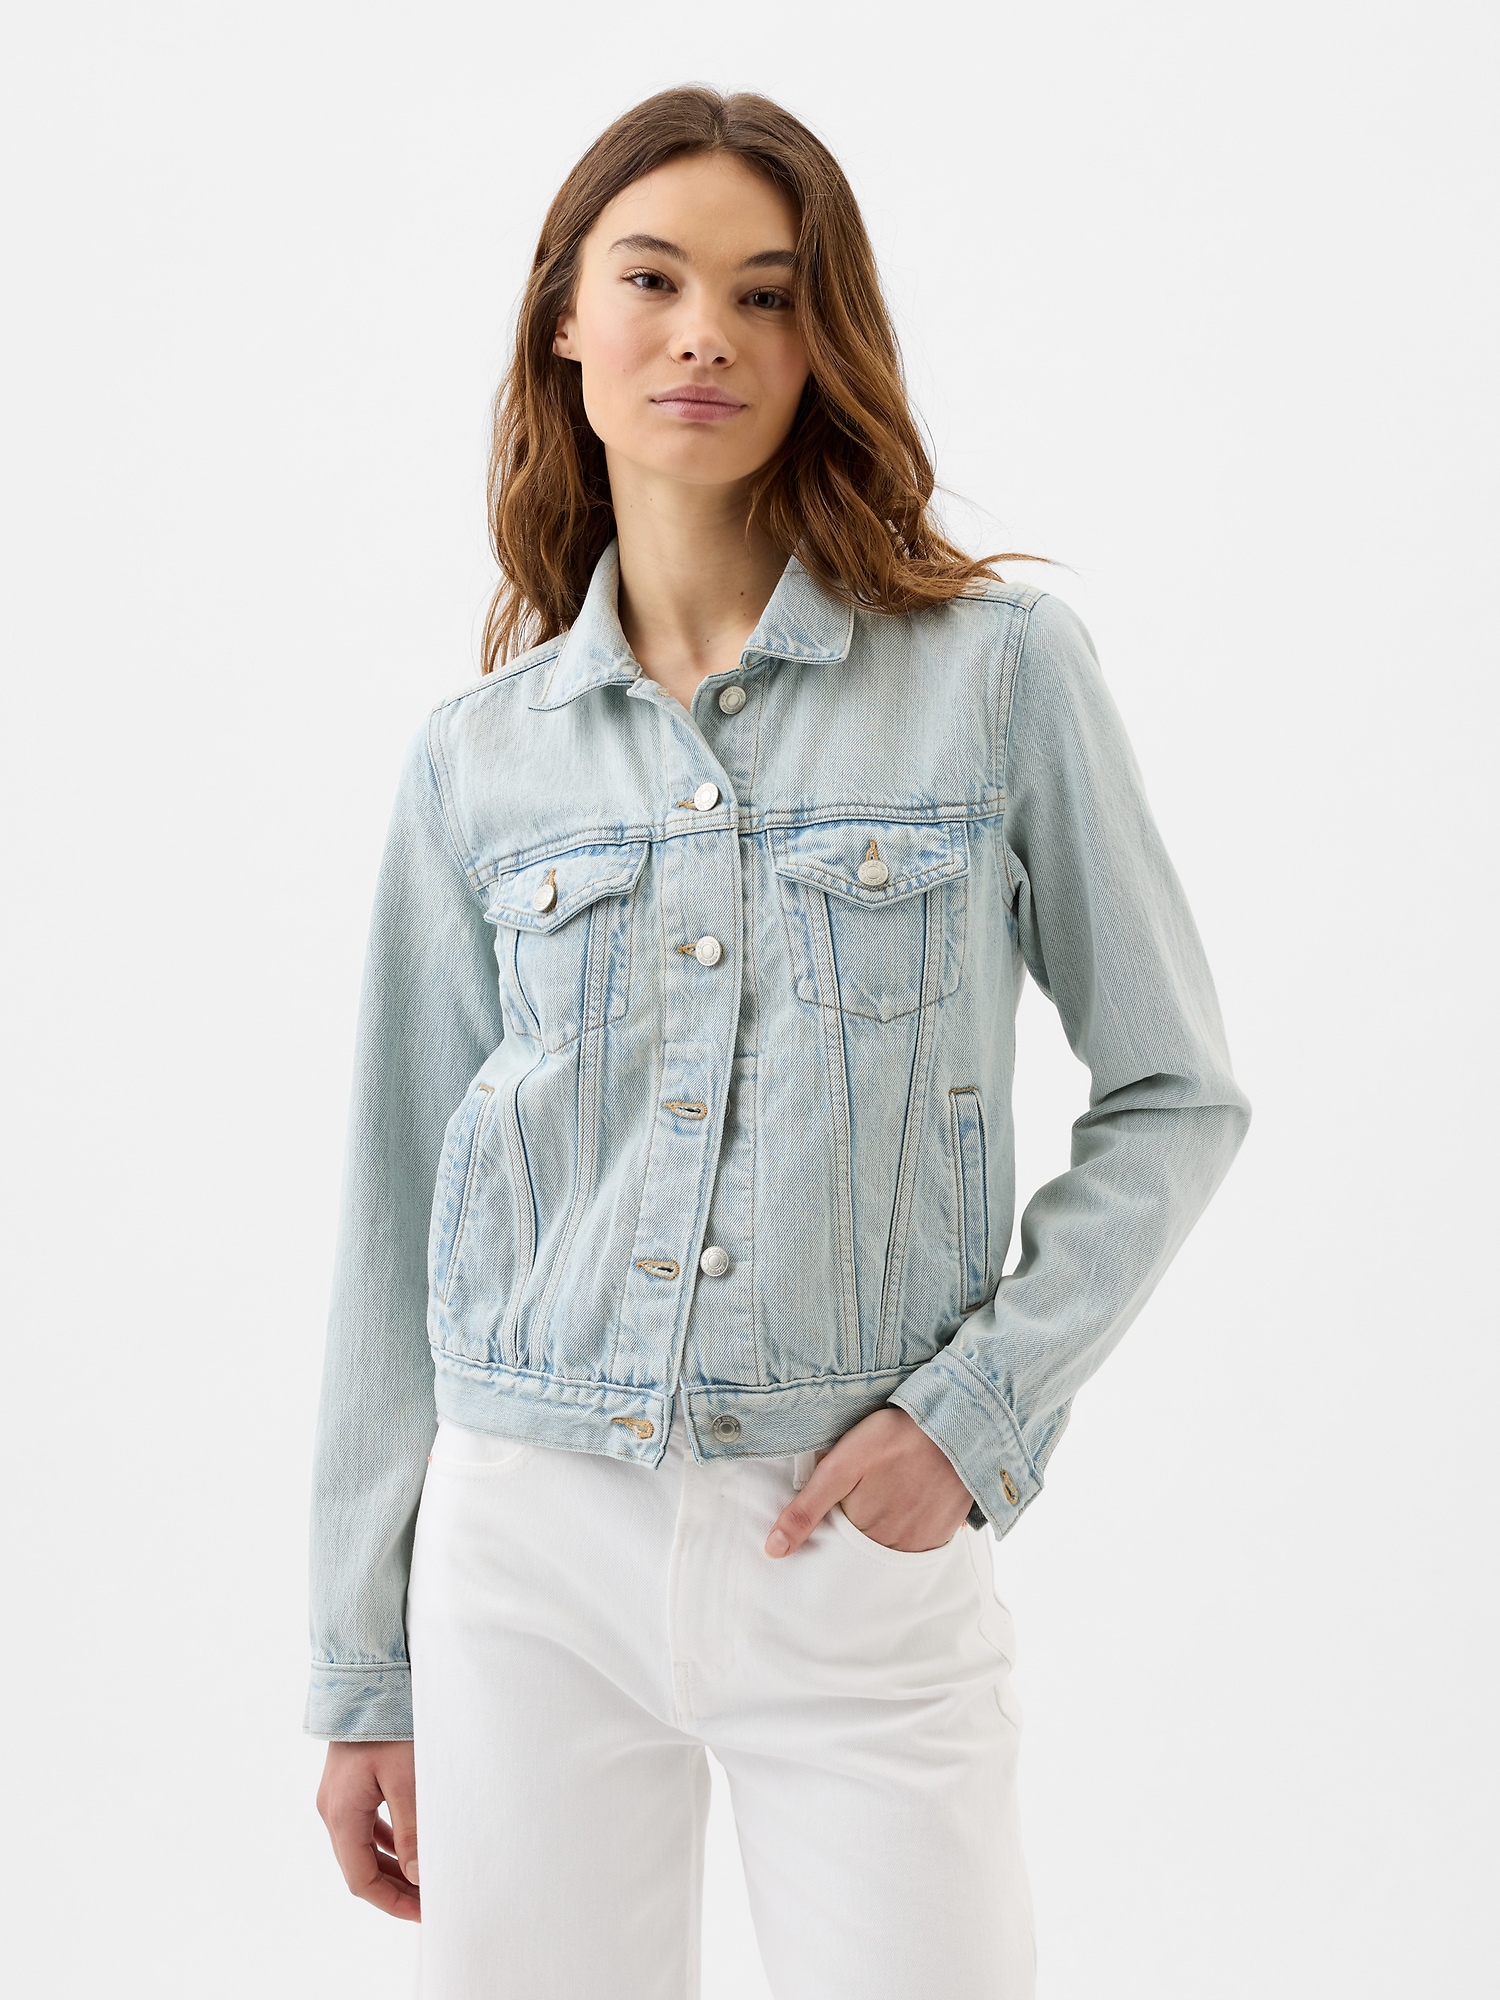 Party Wear Light Grey Cotton Denim Jacket at Rs 650 in Mumbai | ID:  2851509660633